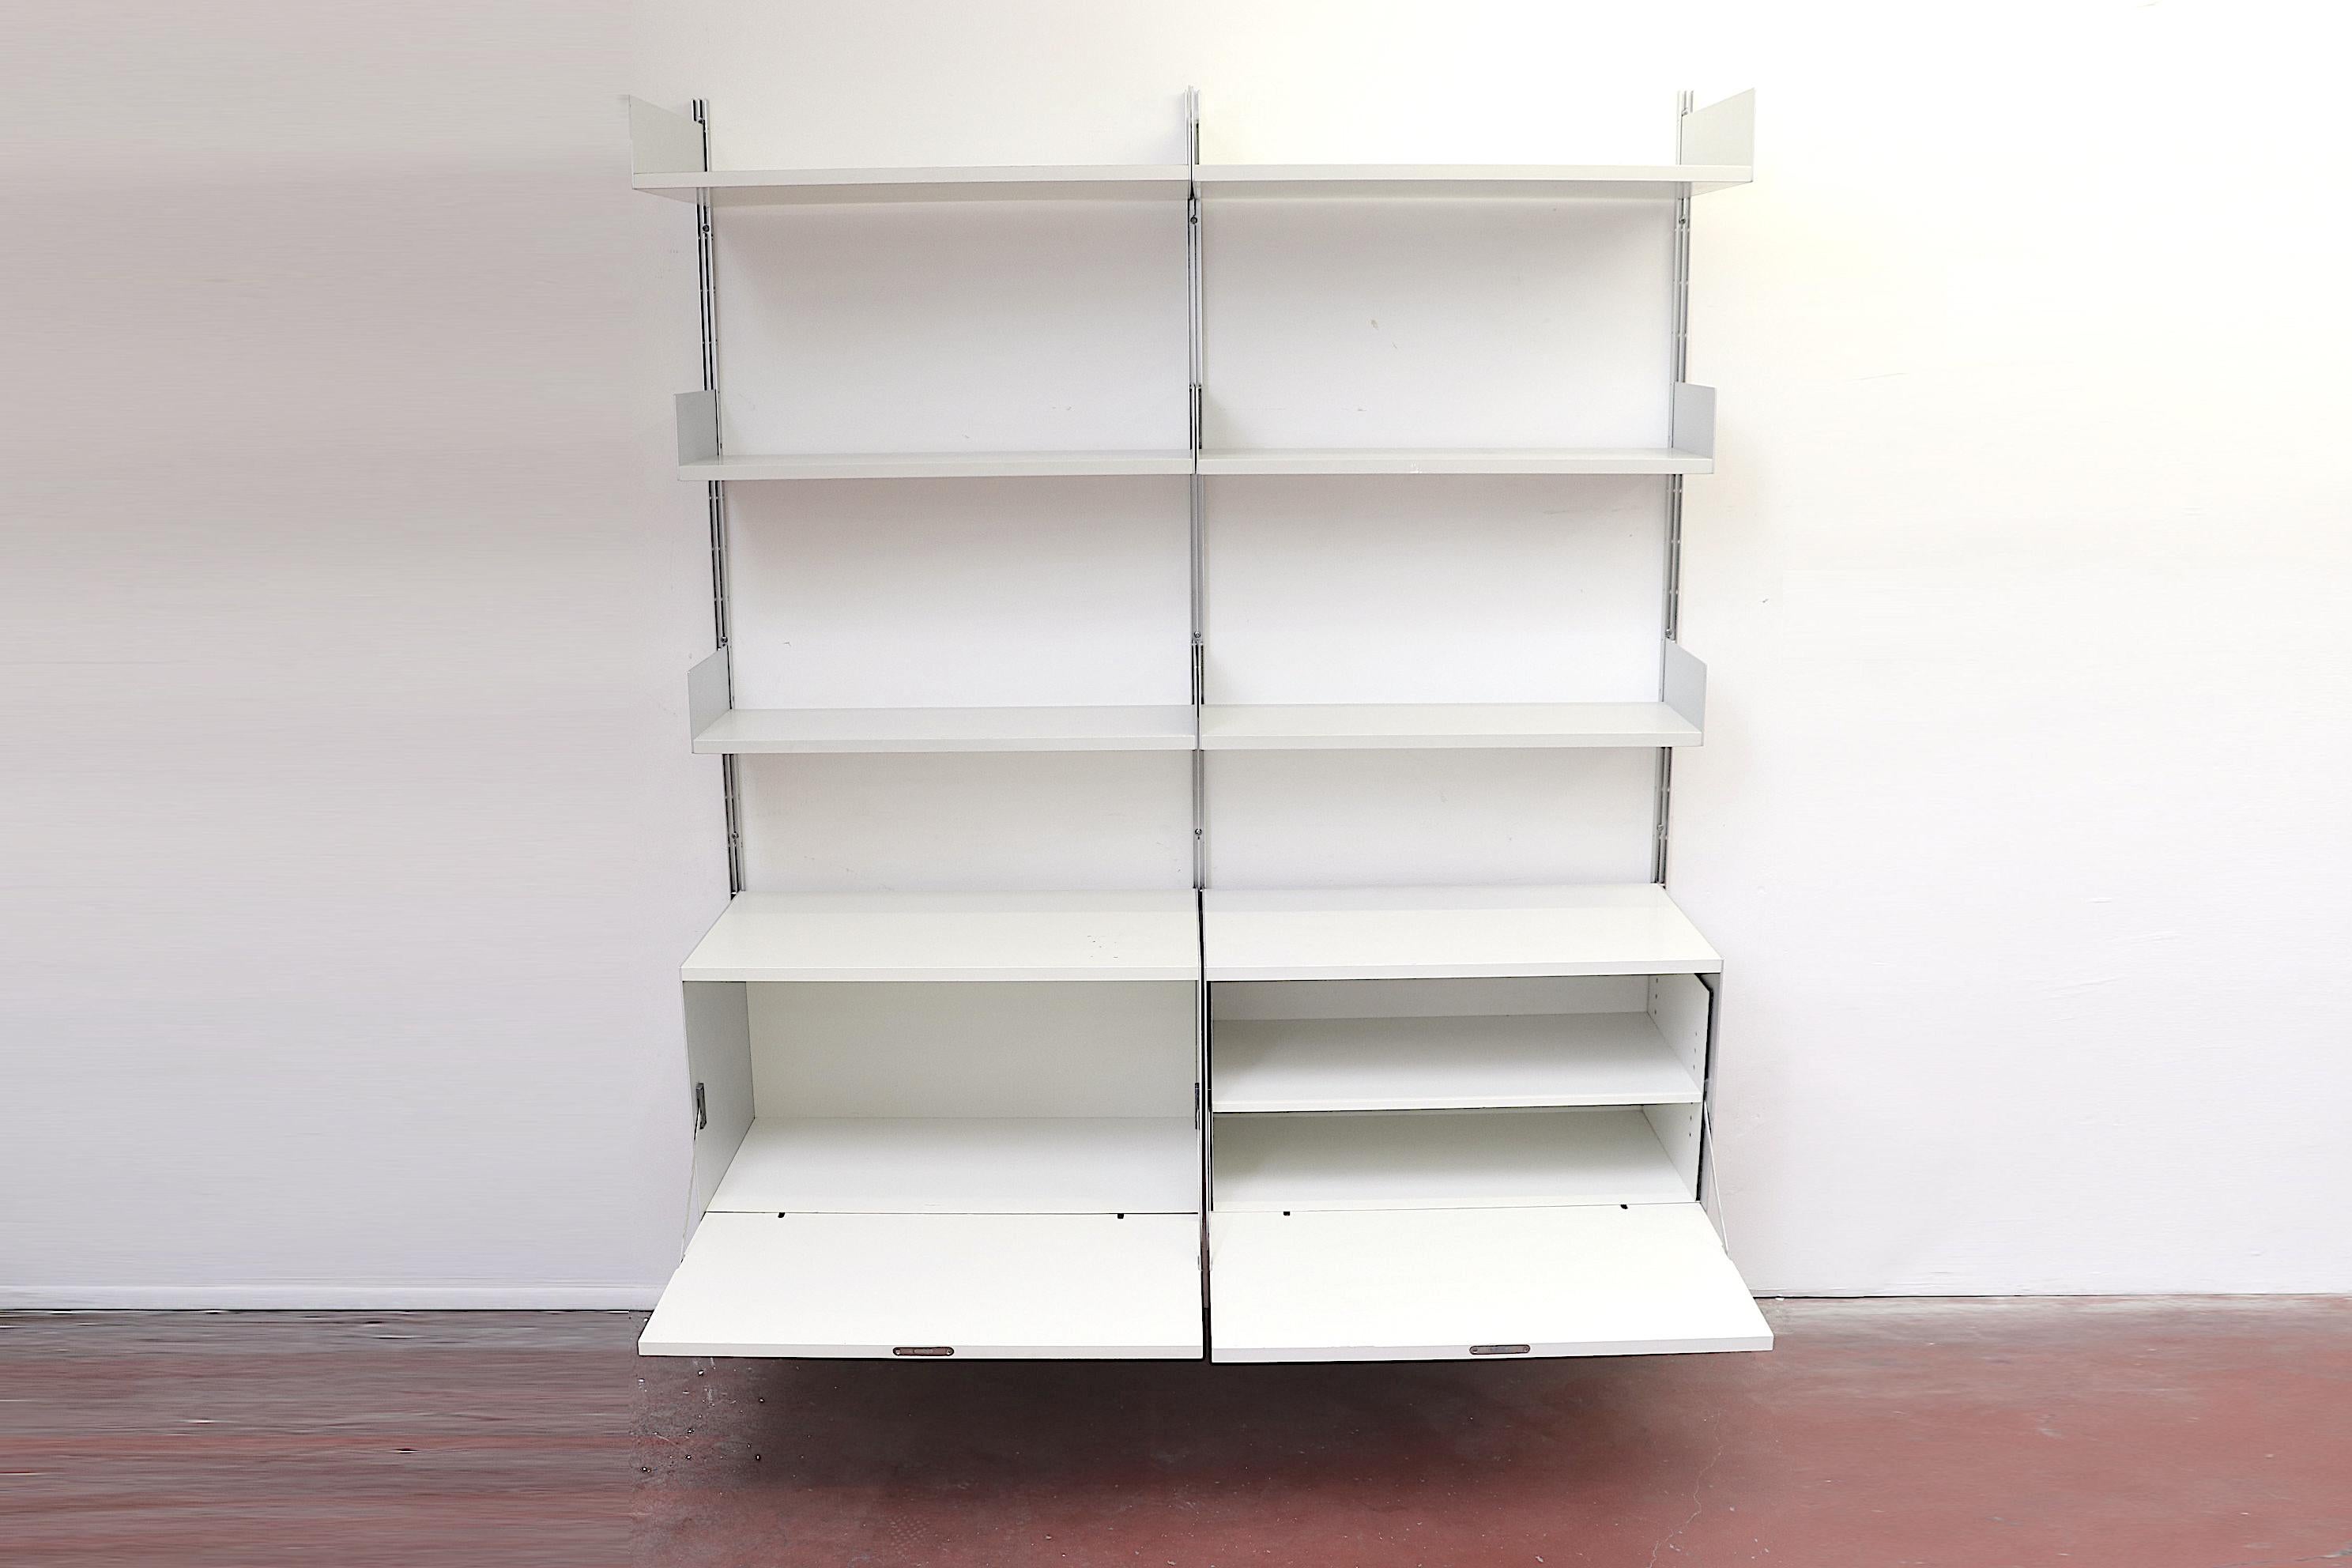 Beautiful 2-section dieter rams industrial shelving unit on aluminum risers with storage cabinets and adjustable shelves. 2 upper drop-down Formica cabinets with keys and 4 adjustable Formica shelves. In original condition with visible wear with